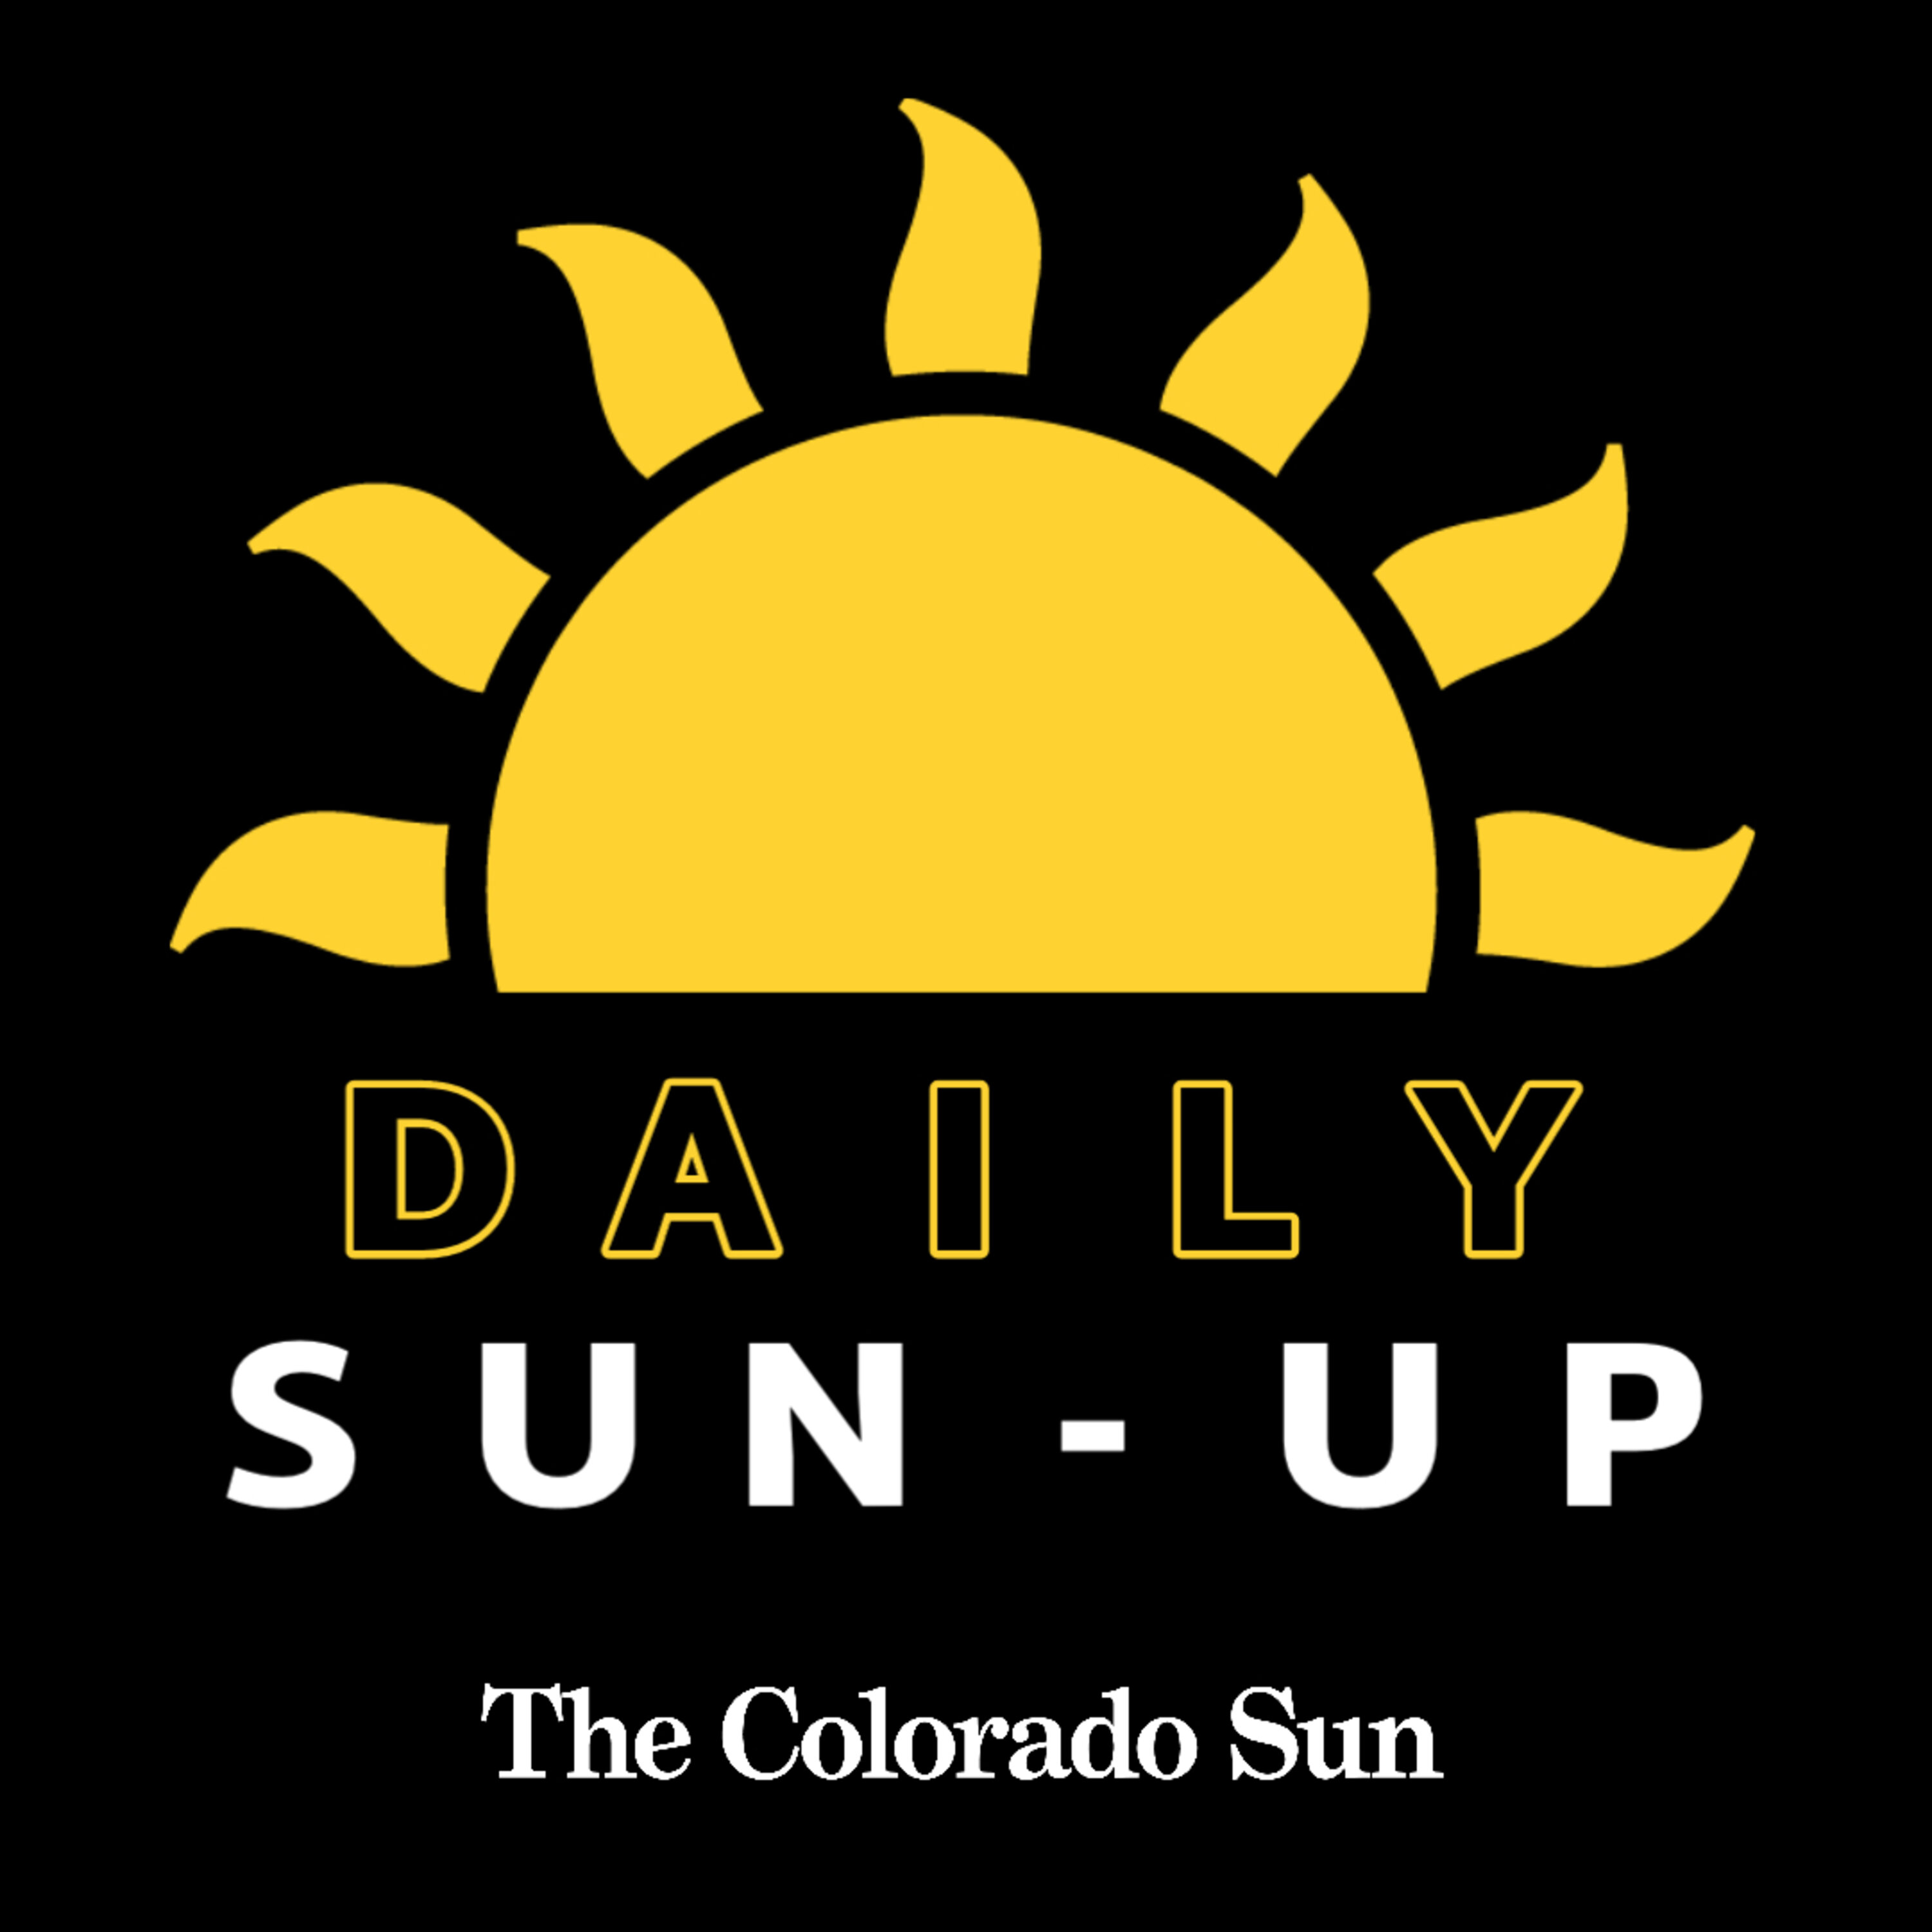 Colorado Sun Daily Sun-Up: A plaque in what used to be Denver’s Chinatown sparks conversation, Yucca House